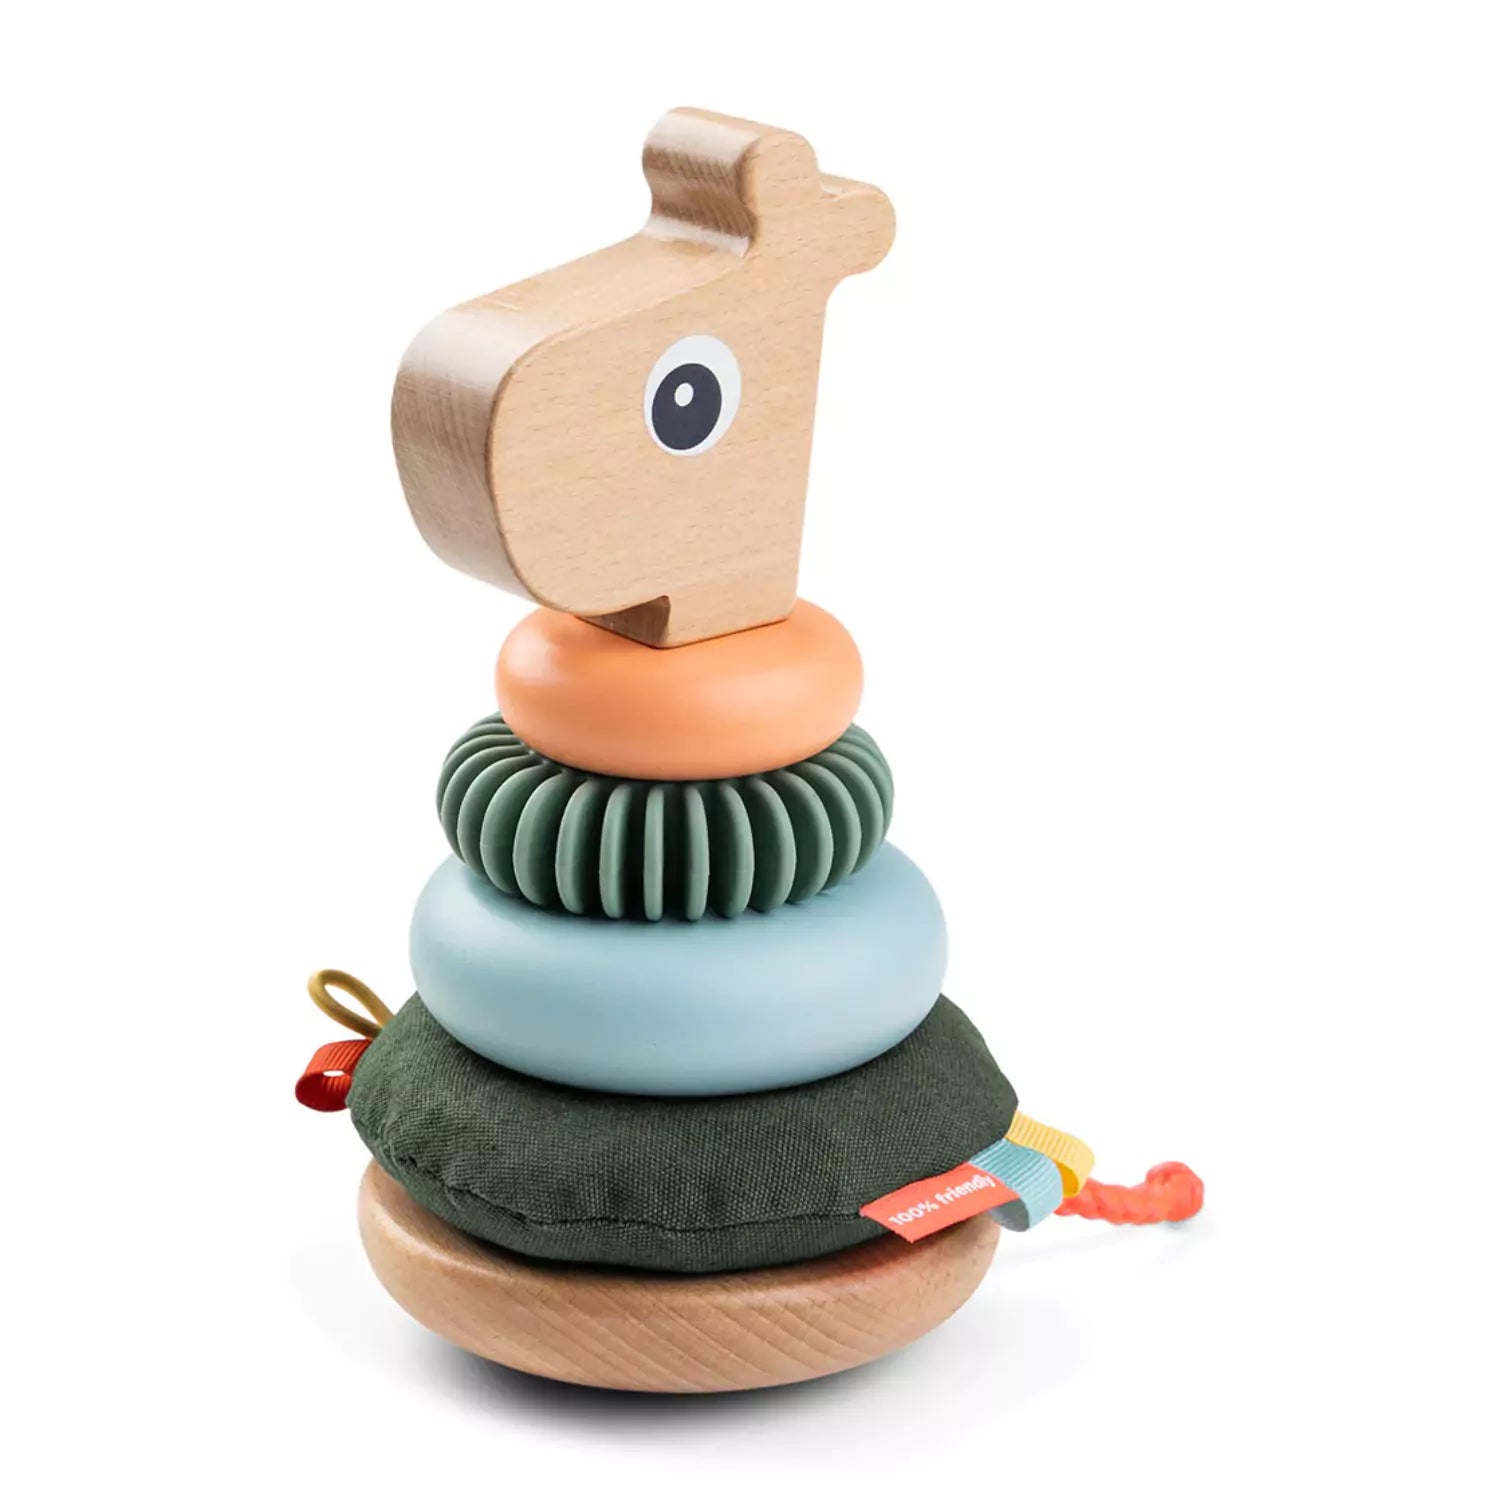 An image of Fun & Educational Wooden Stacking Game for Toddlers